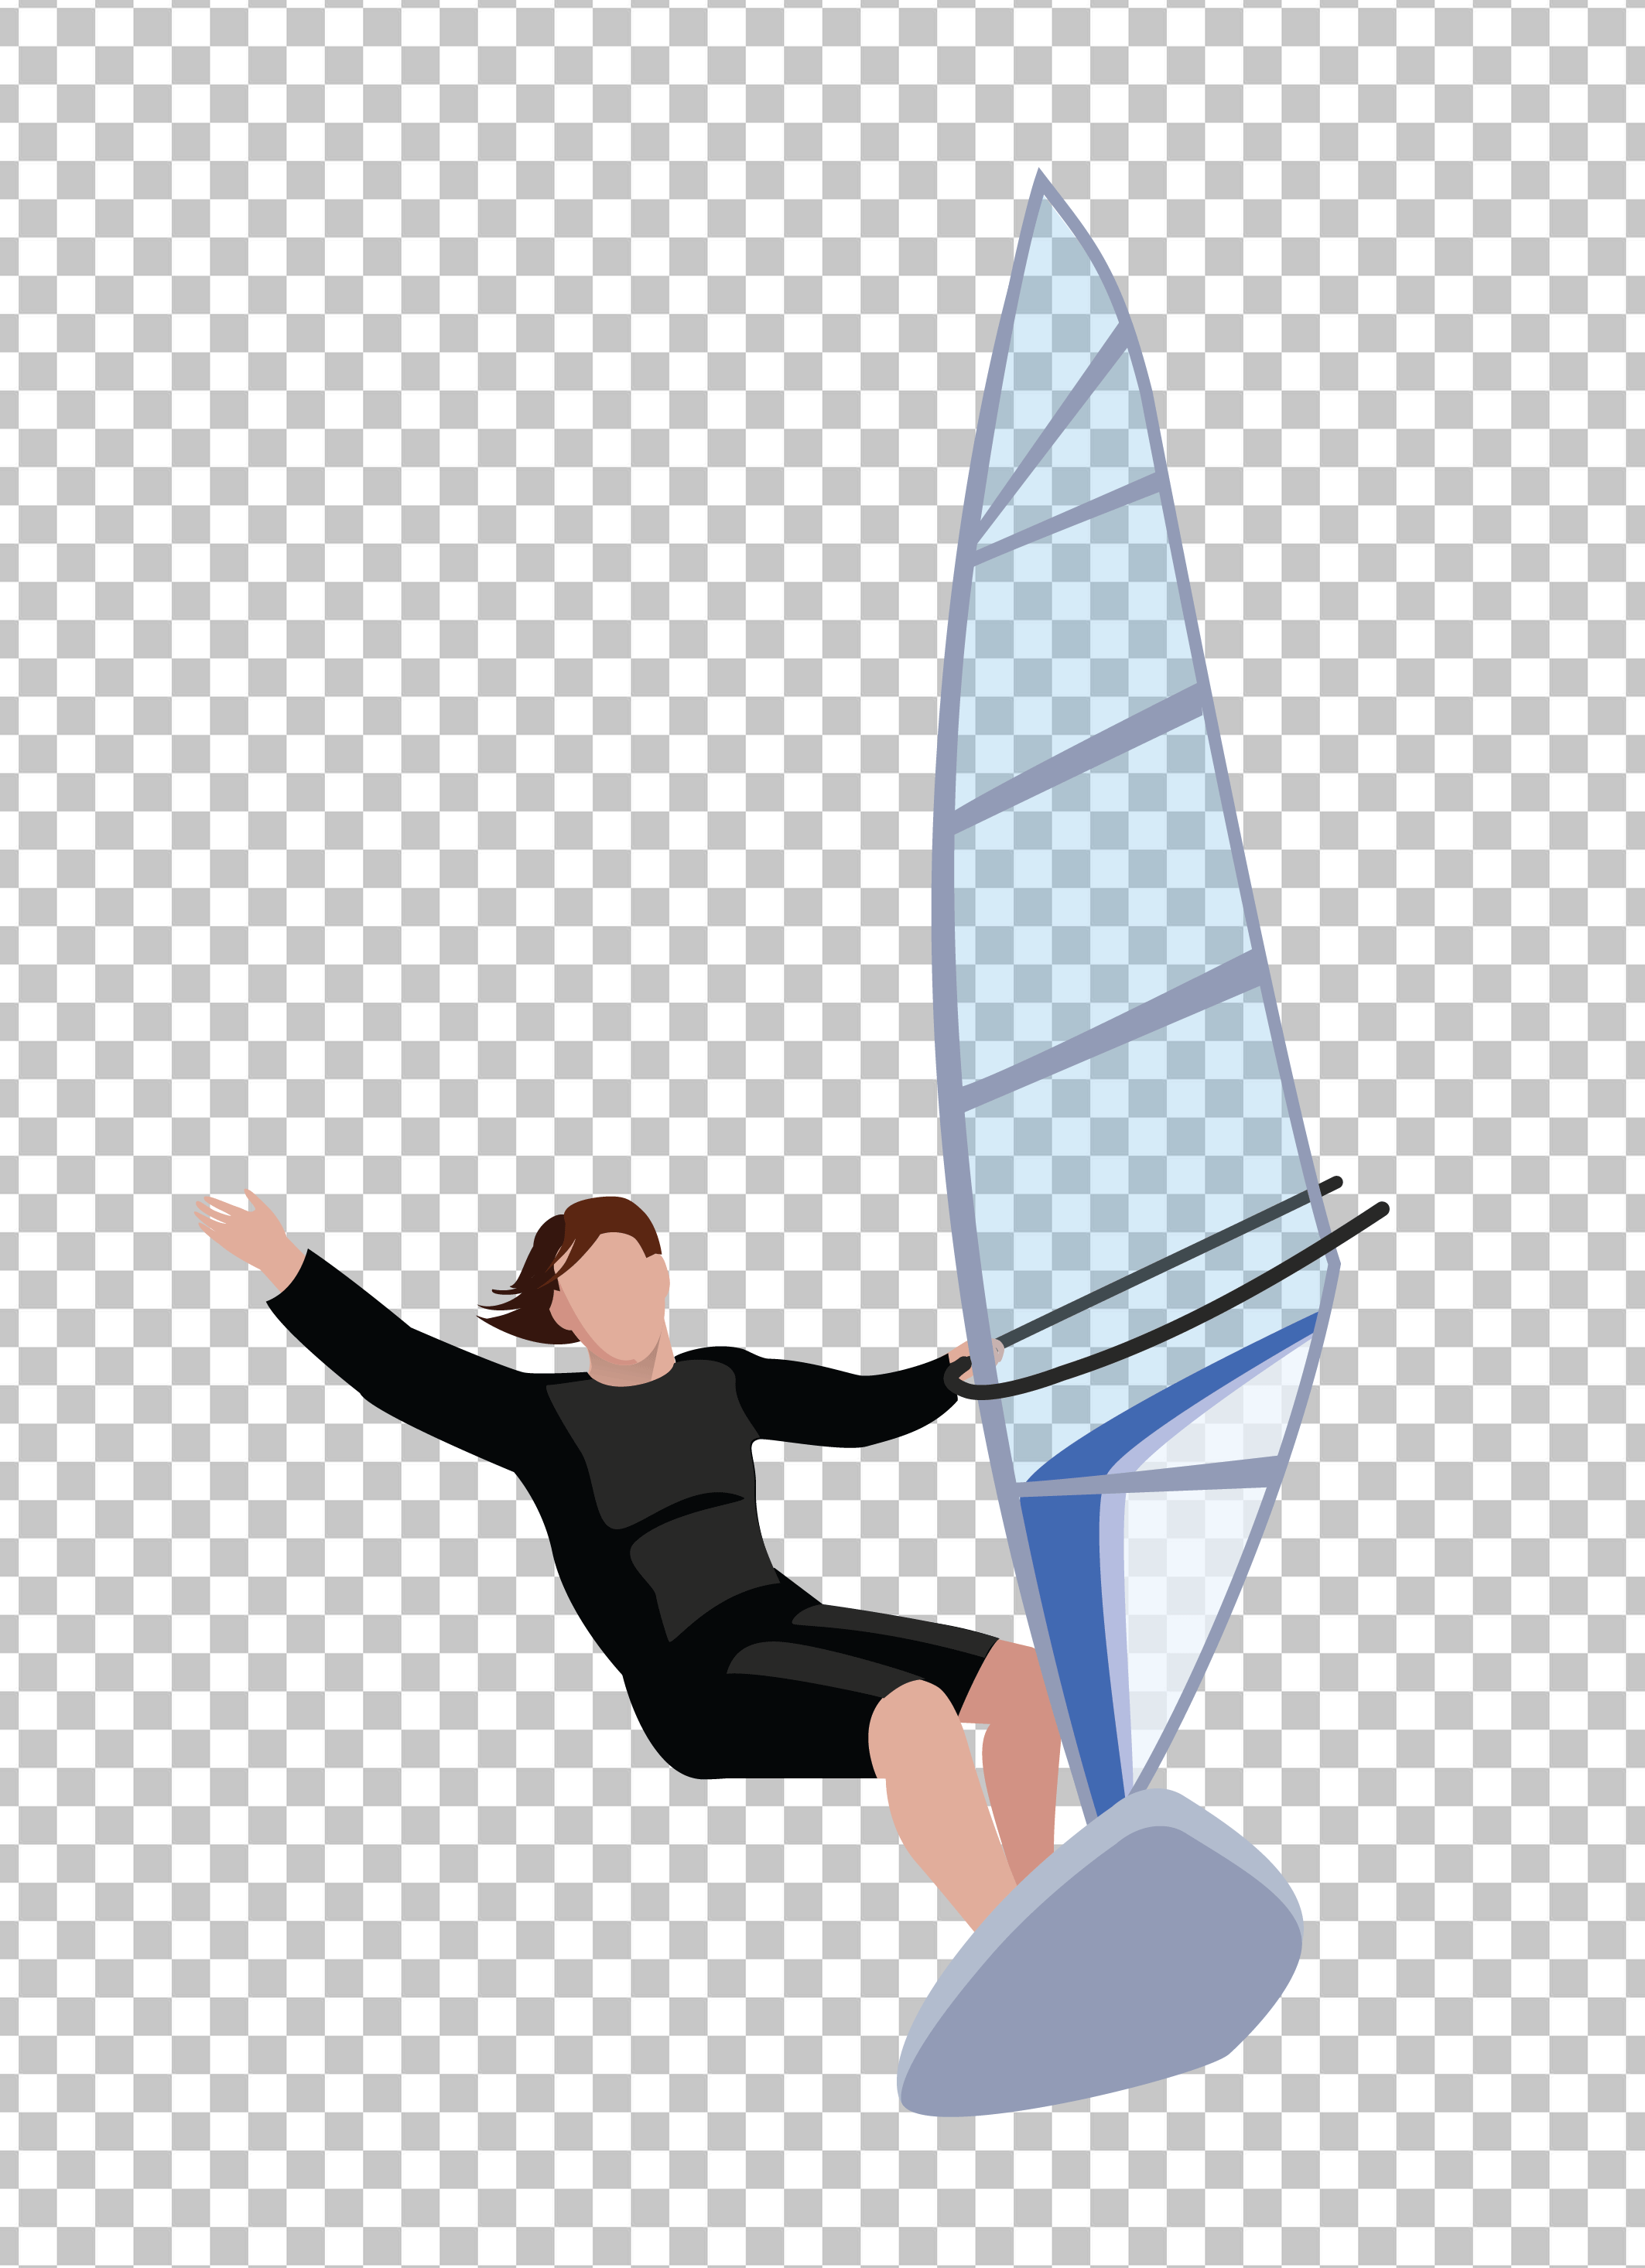 Windsurfing Silhouette PNG Image